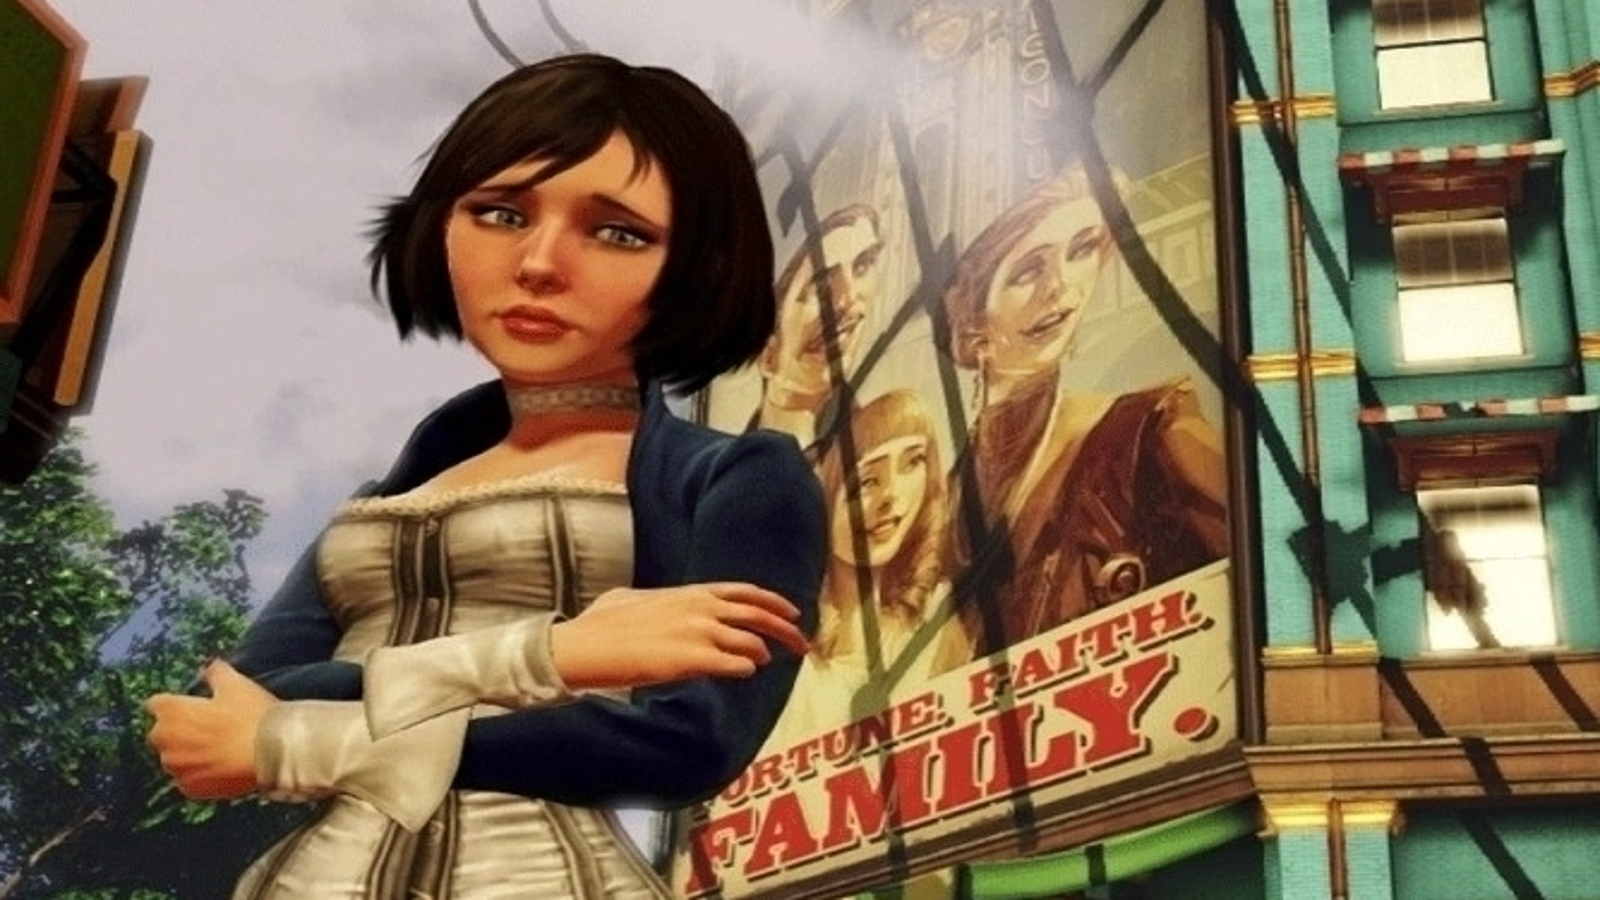 BioShock Infinite character gets changed after religious discussion